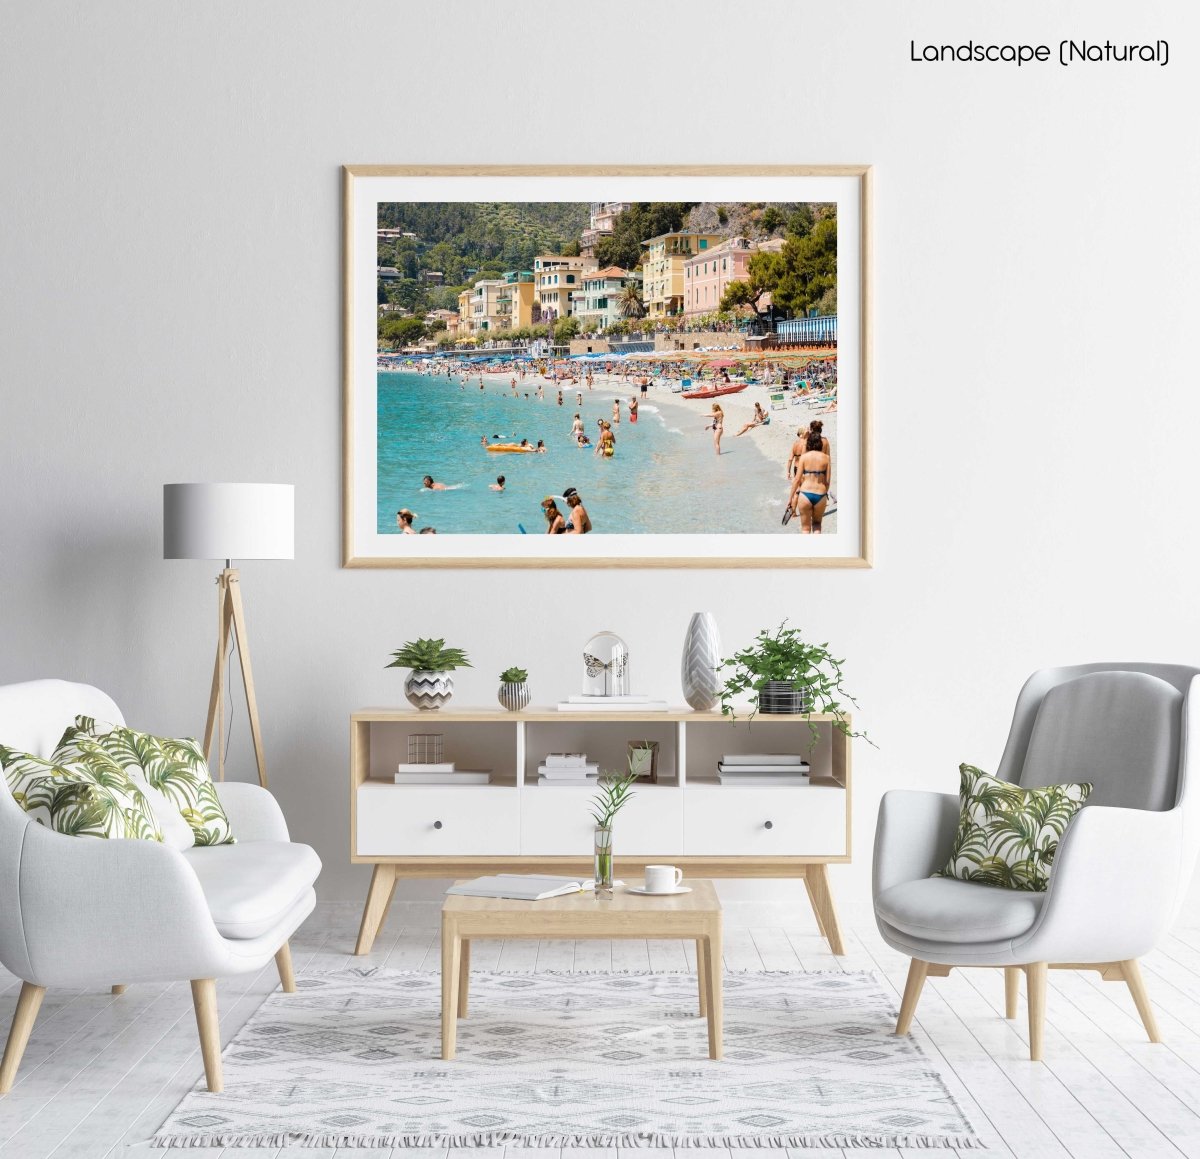 Busy Monterosso beach with people swimming, snorkeling and chilling on summers day in a natural fine art frame